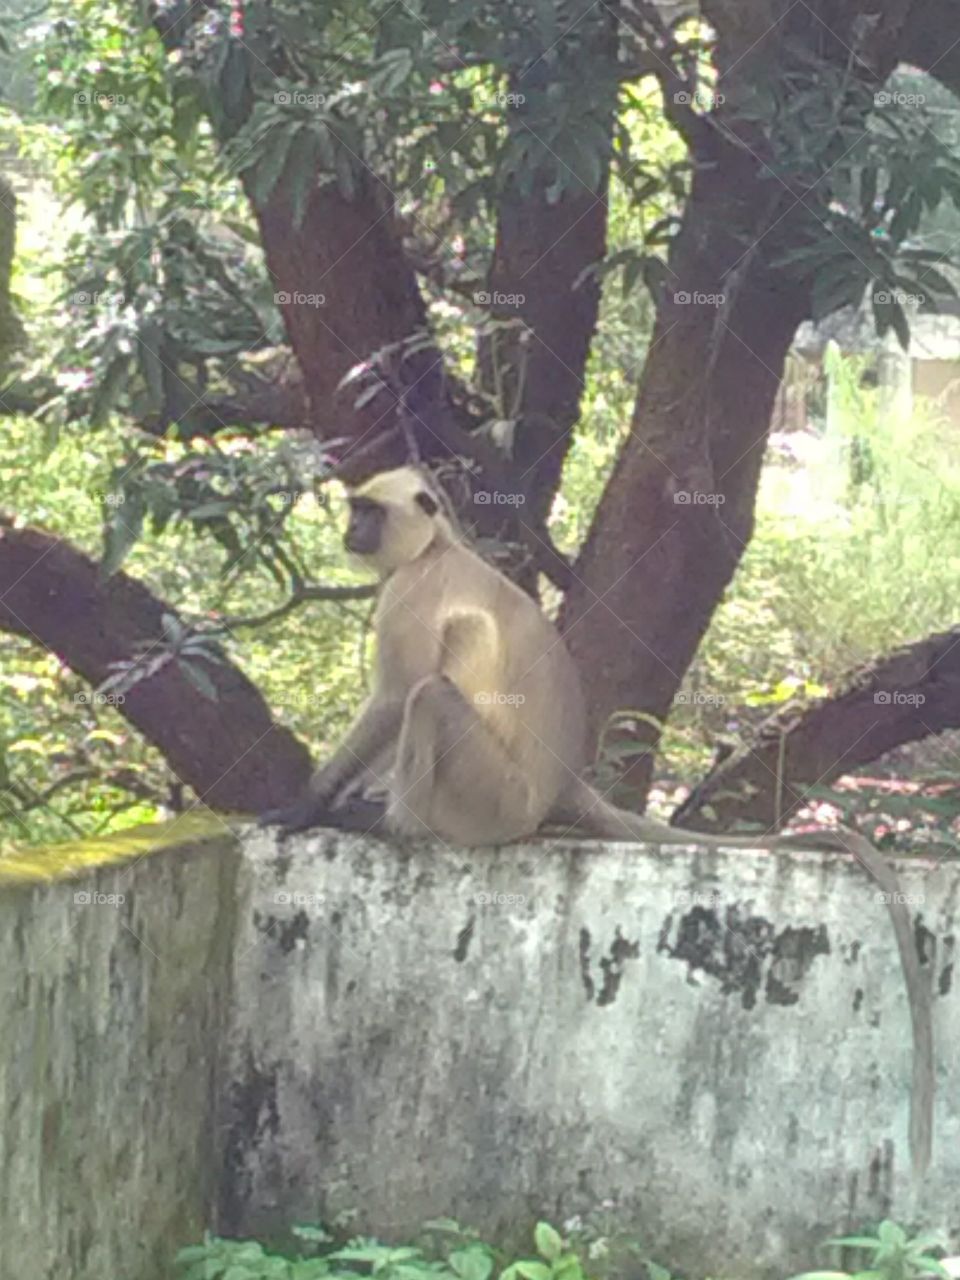 These monkeys are very playful in nature and they come towards a wandering city in search of food.